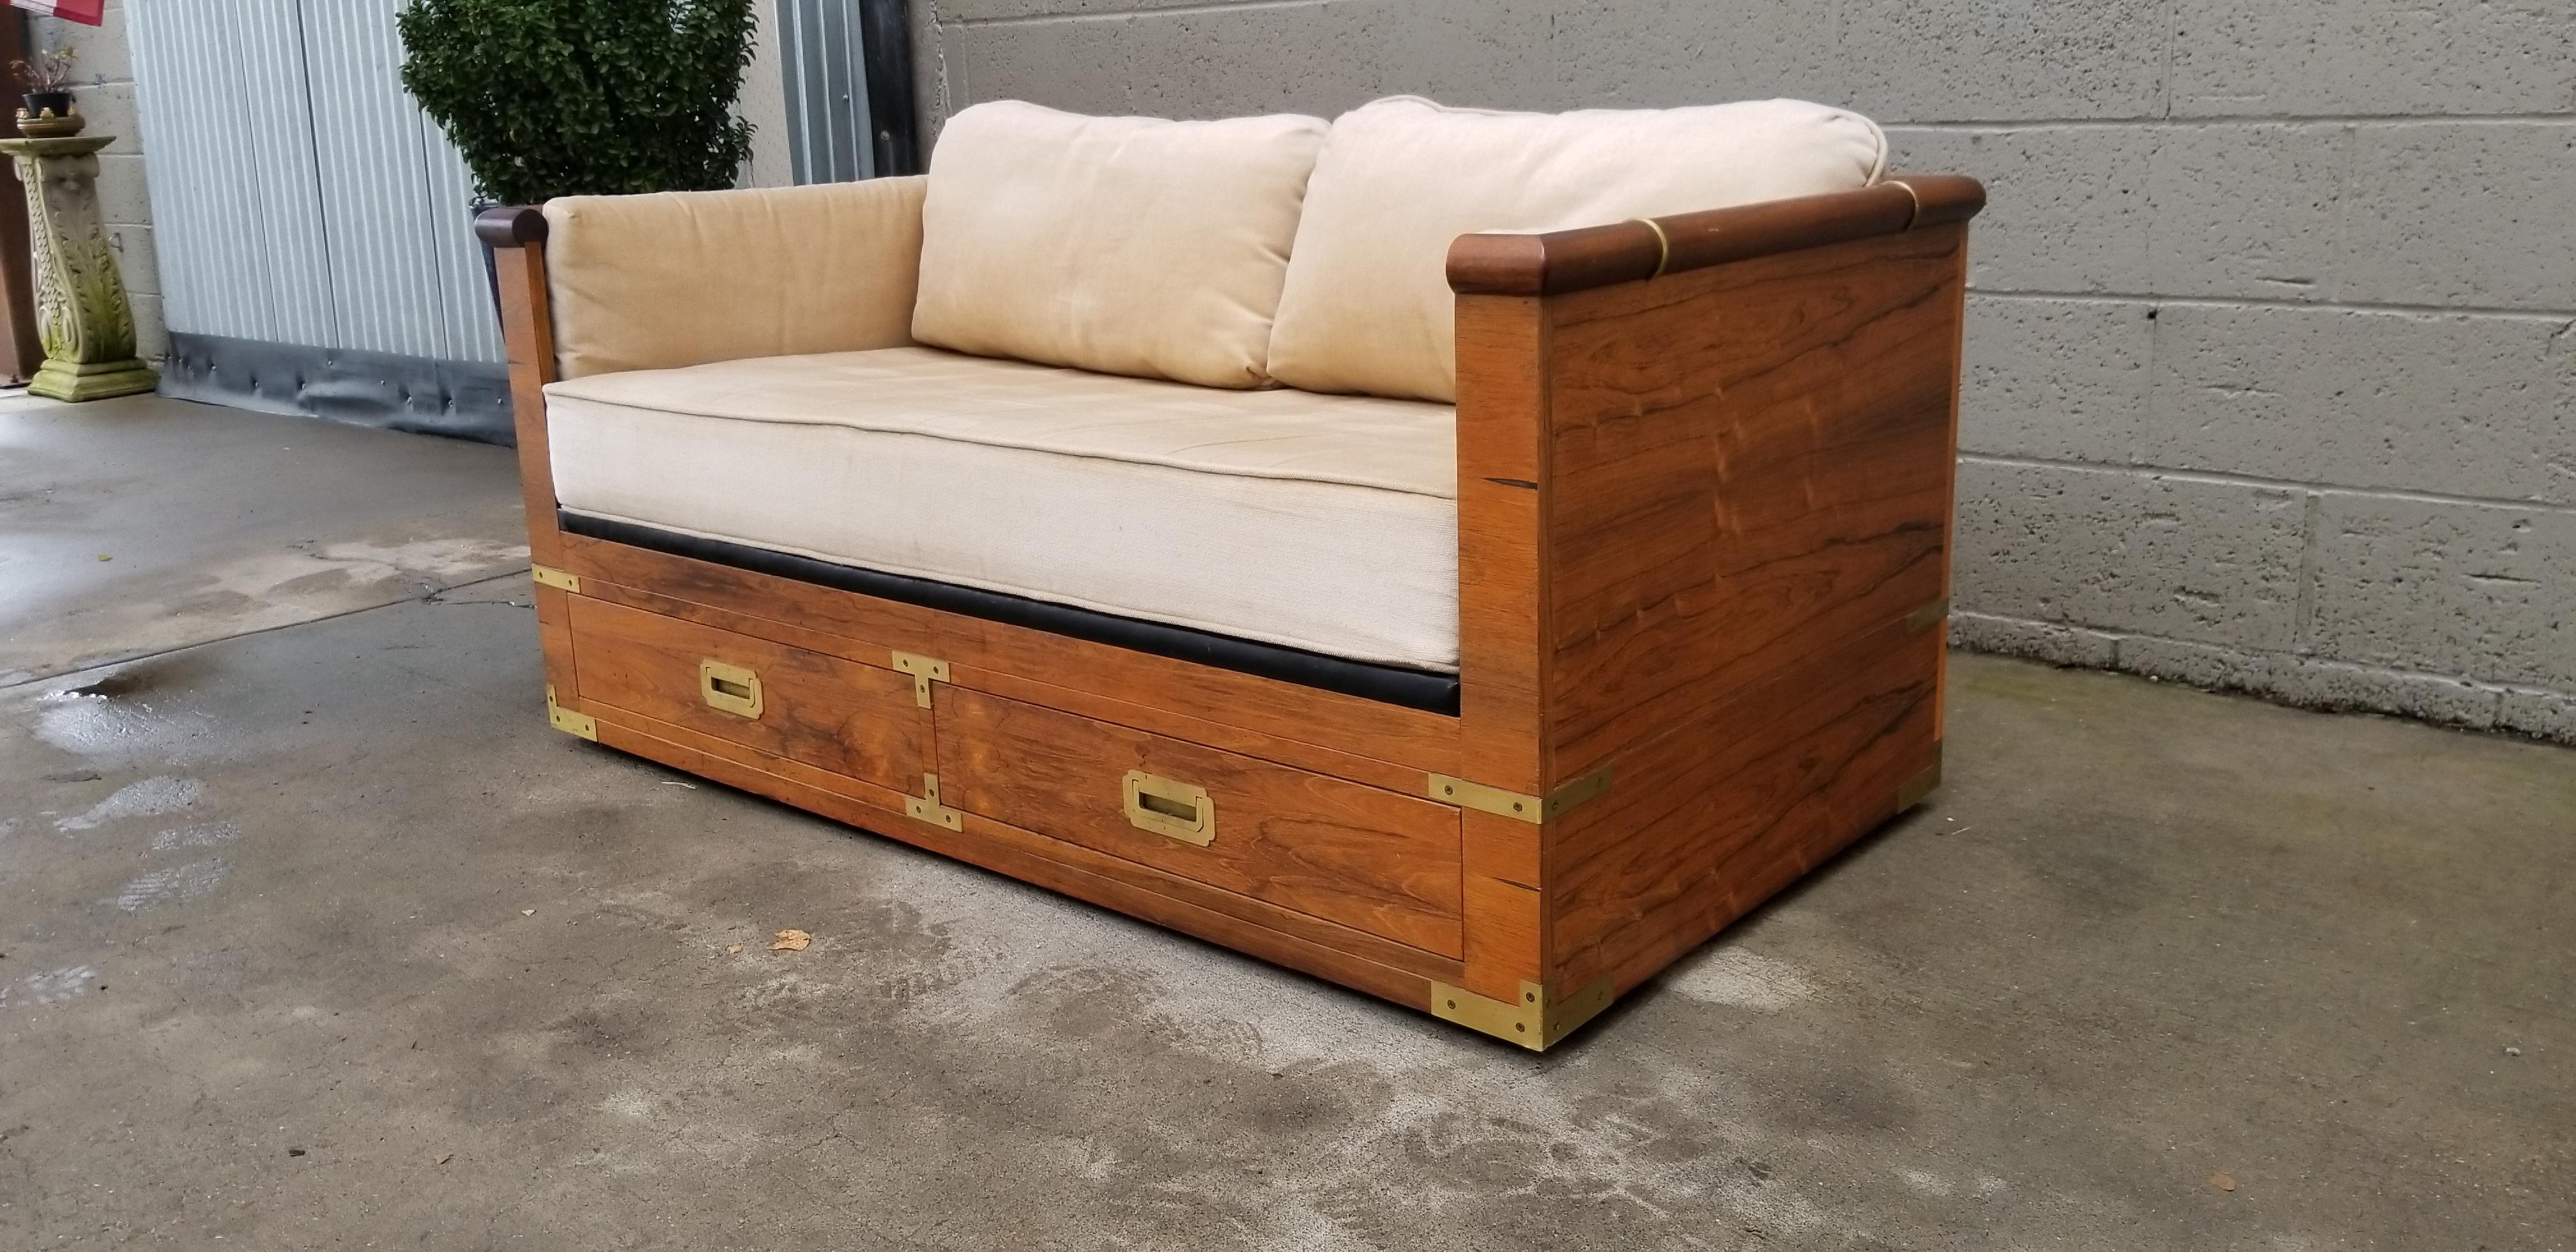 Fine craftsmanship and materials throughout in this rosewood loveseat by Marge Carson, circa 1970s. Finished on all sides with a beautiful figured rosewood and brass detail. Two drawers for additional storage. Goose down filled cushions. Rosewood